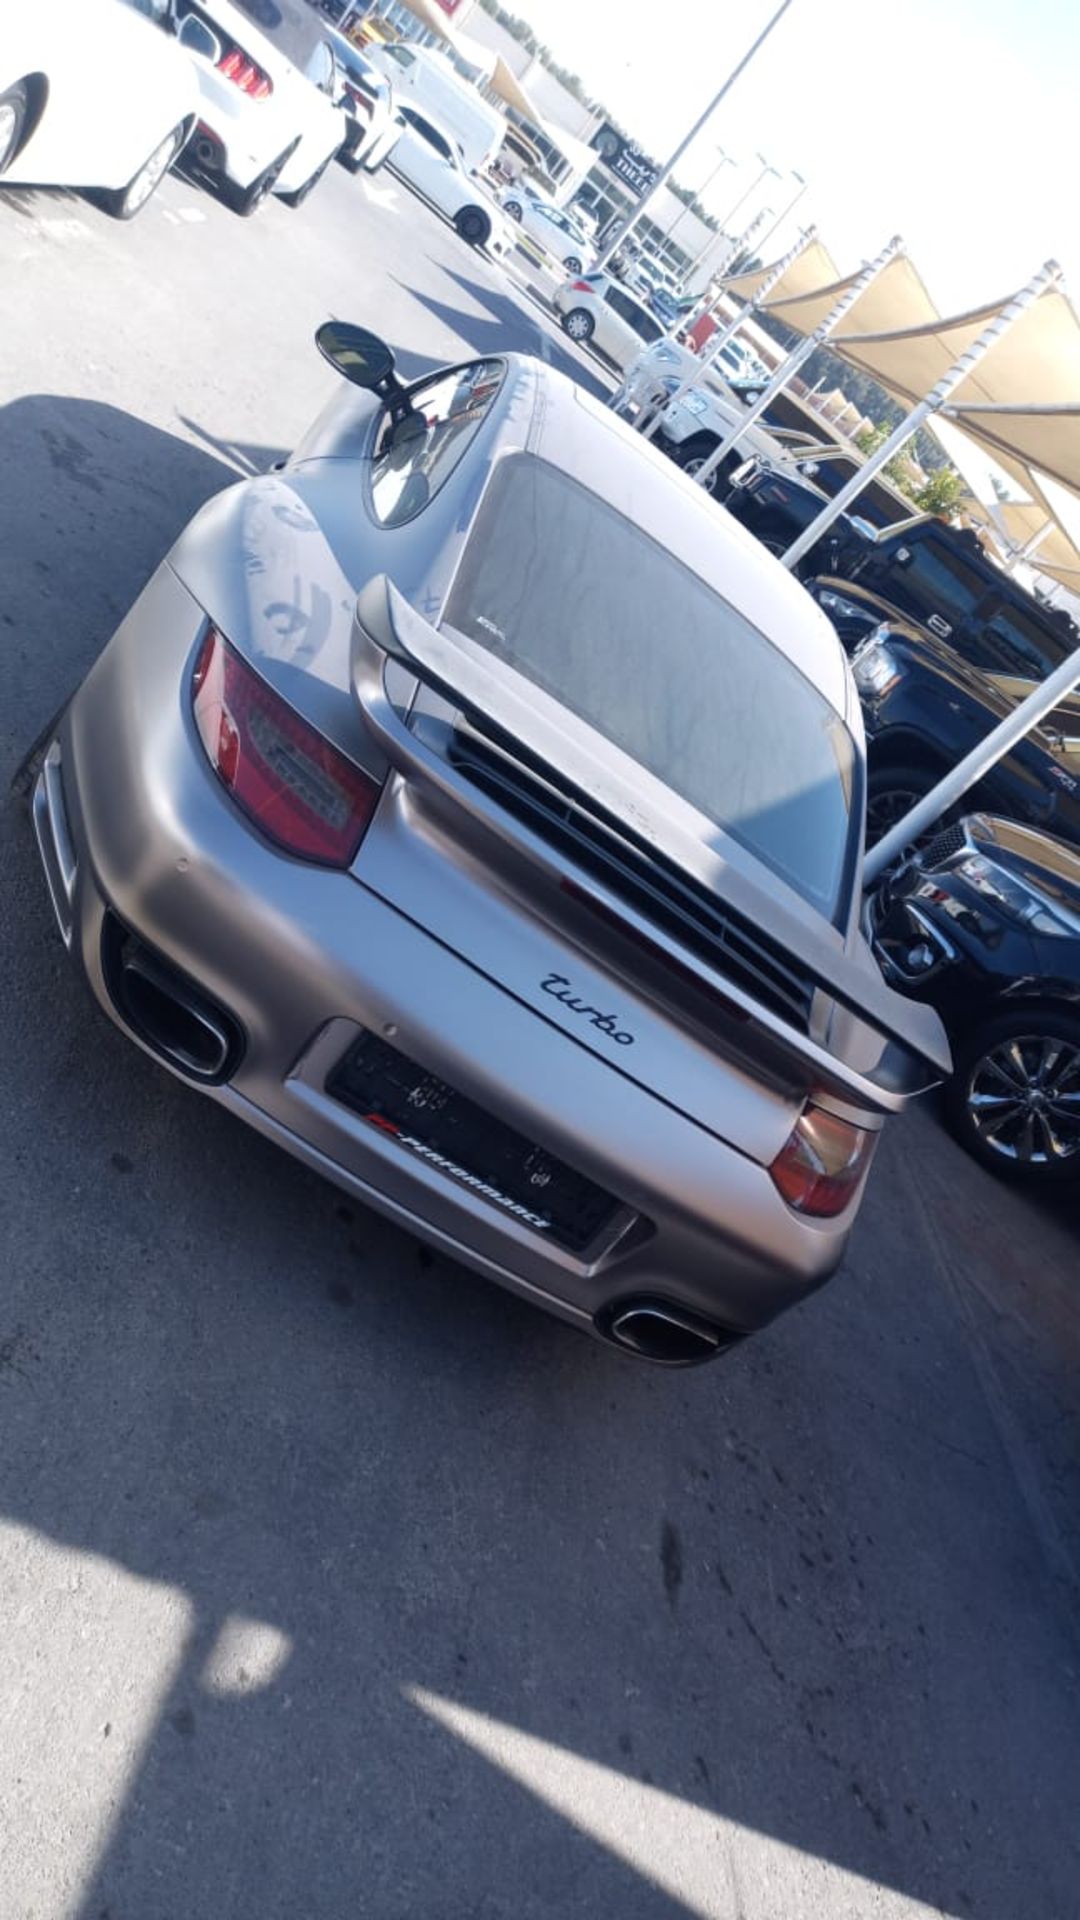 2010 PORSCHE 911 TURBO PDK 65,000 KM - CAN SELL VAT FREE FOR EXPORT - Image 5 of 20